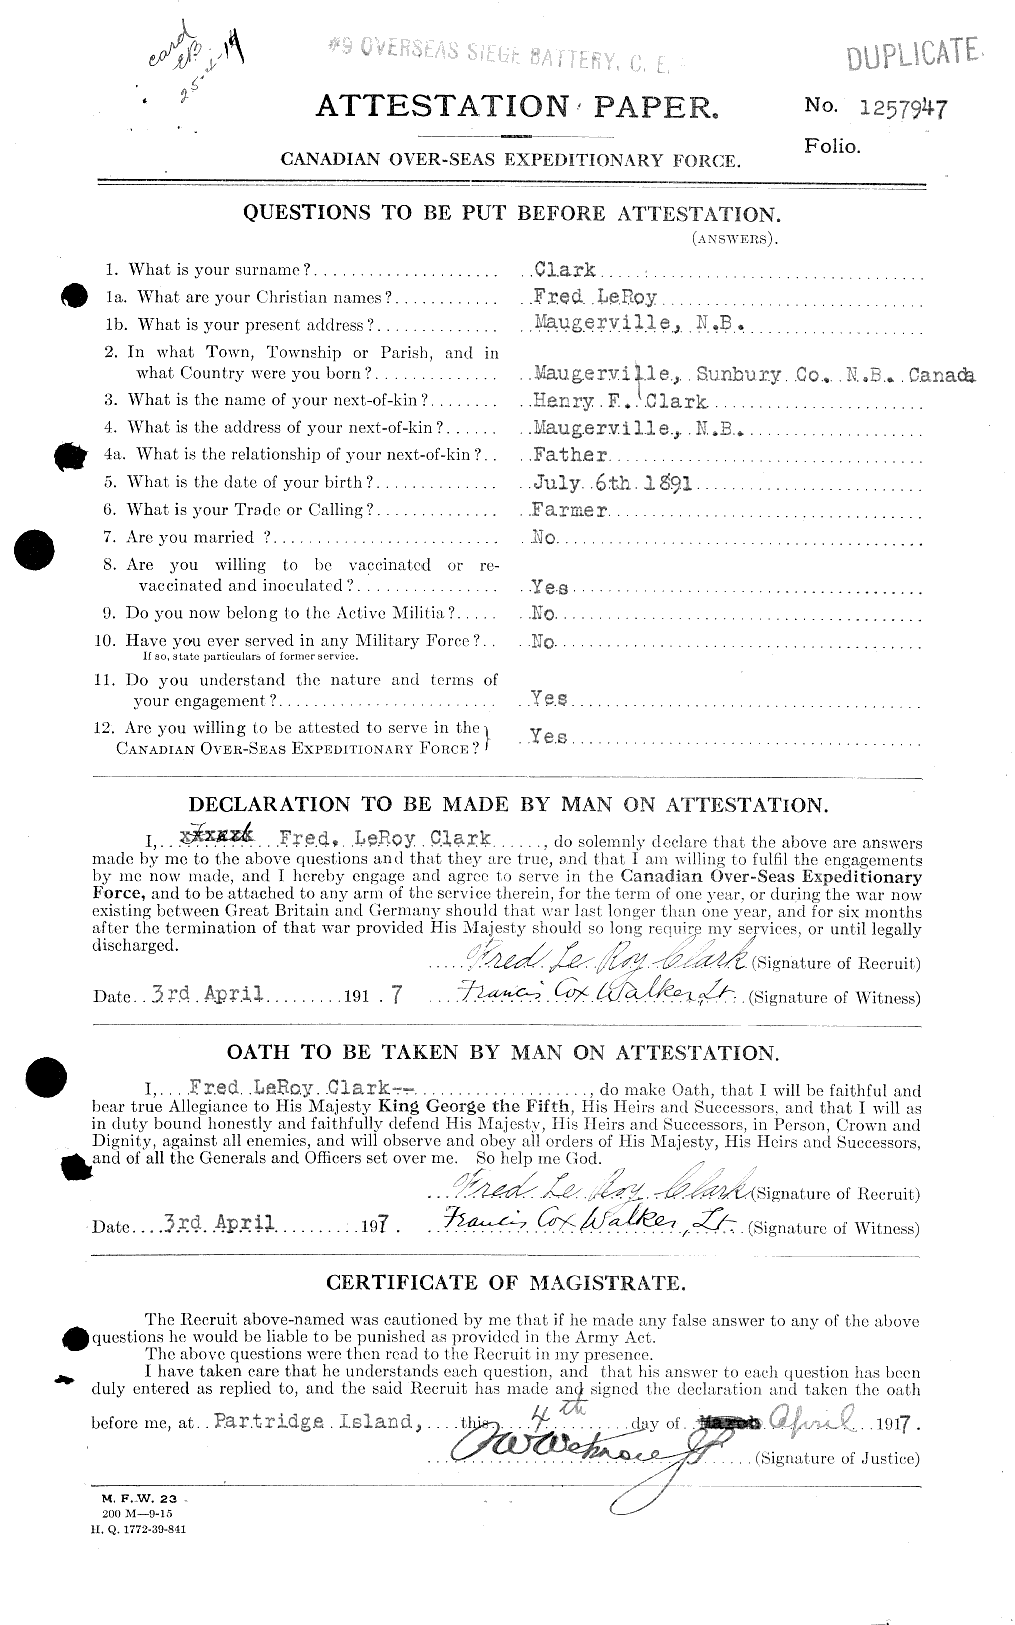 Personnel Records of the First World War - CEF 020980a